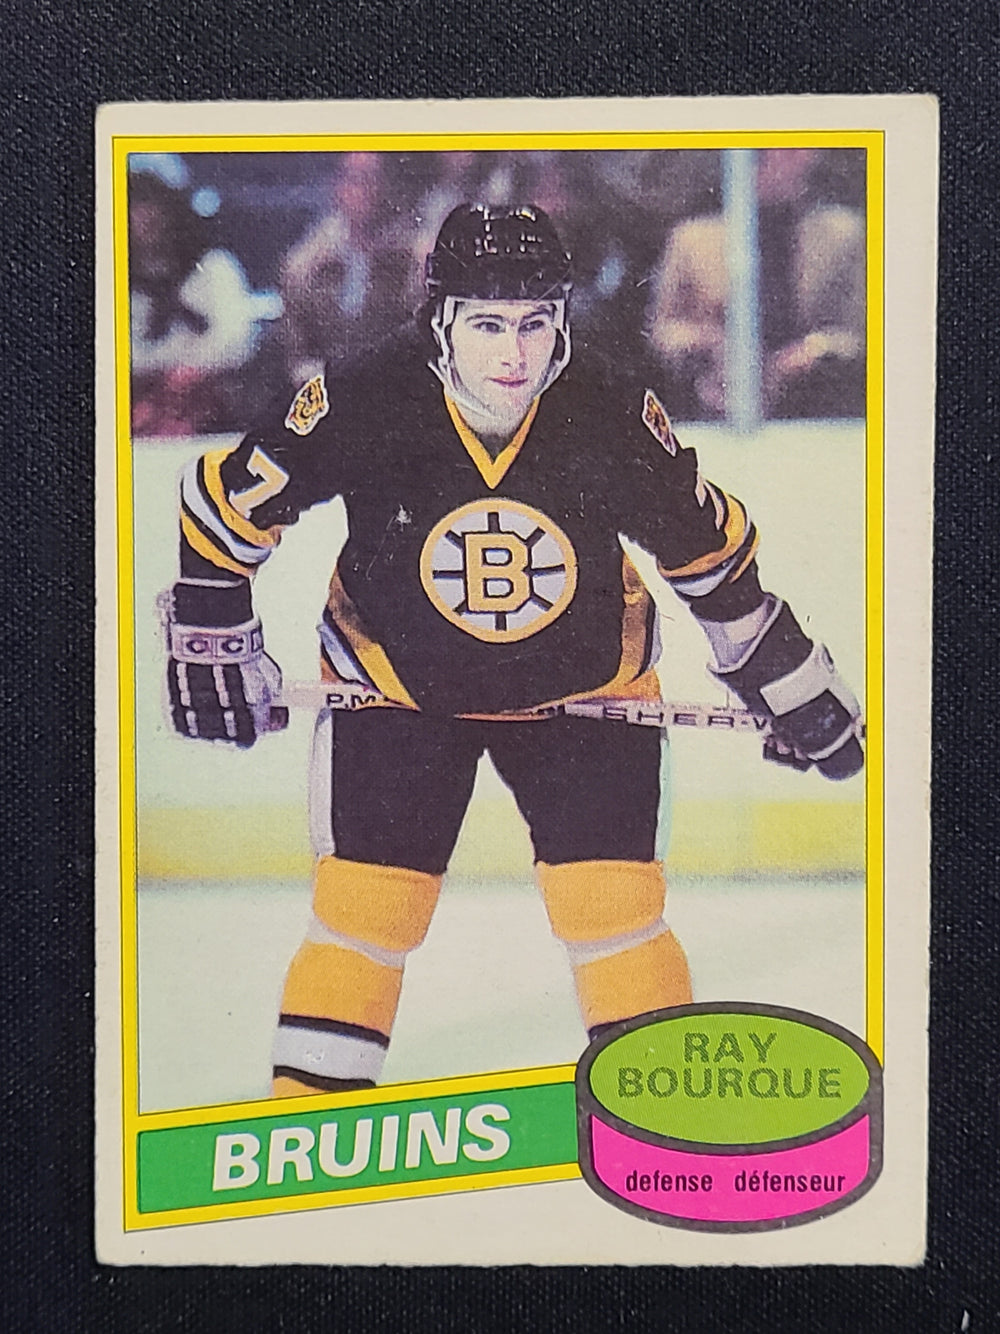 1980-81 OPC #140 Ray Bourque Boston Bruins RC Rookie Card *See Photos for Condition